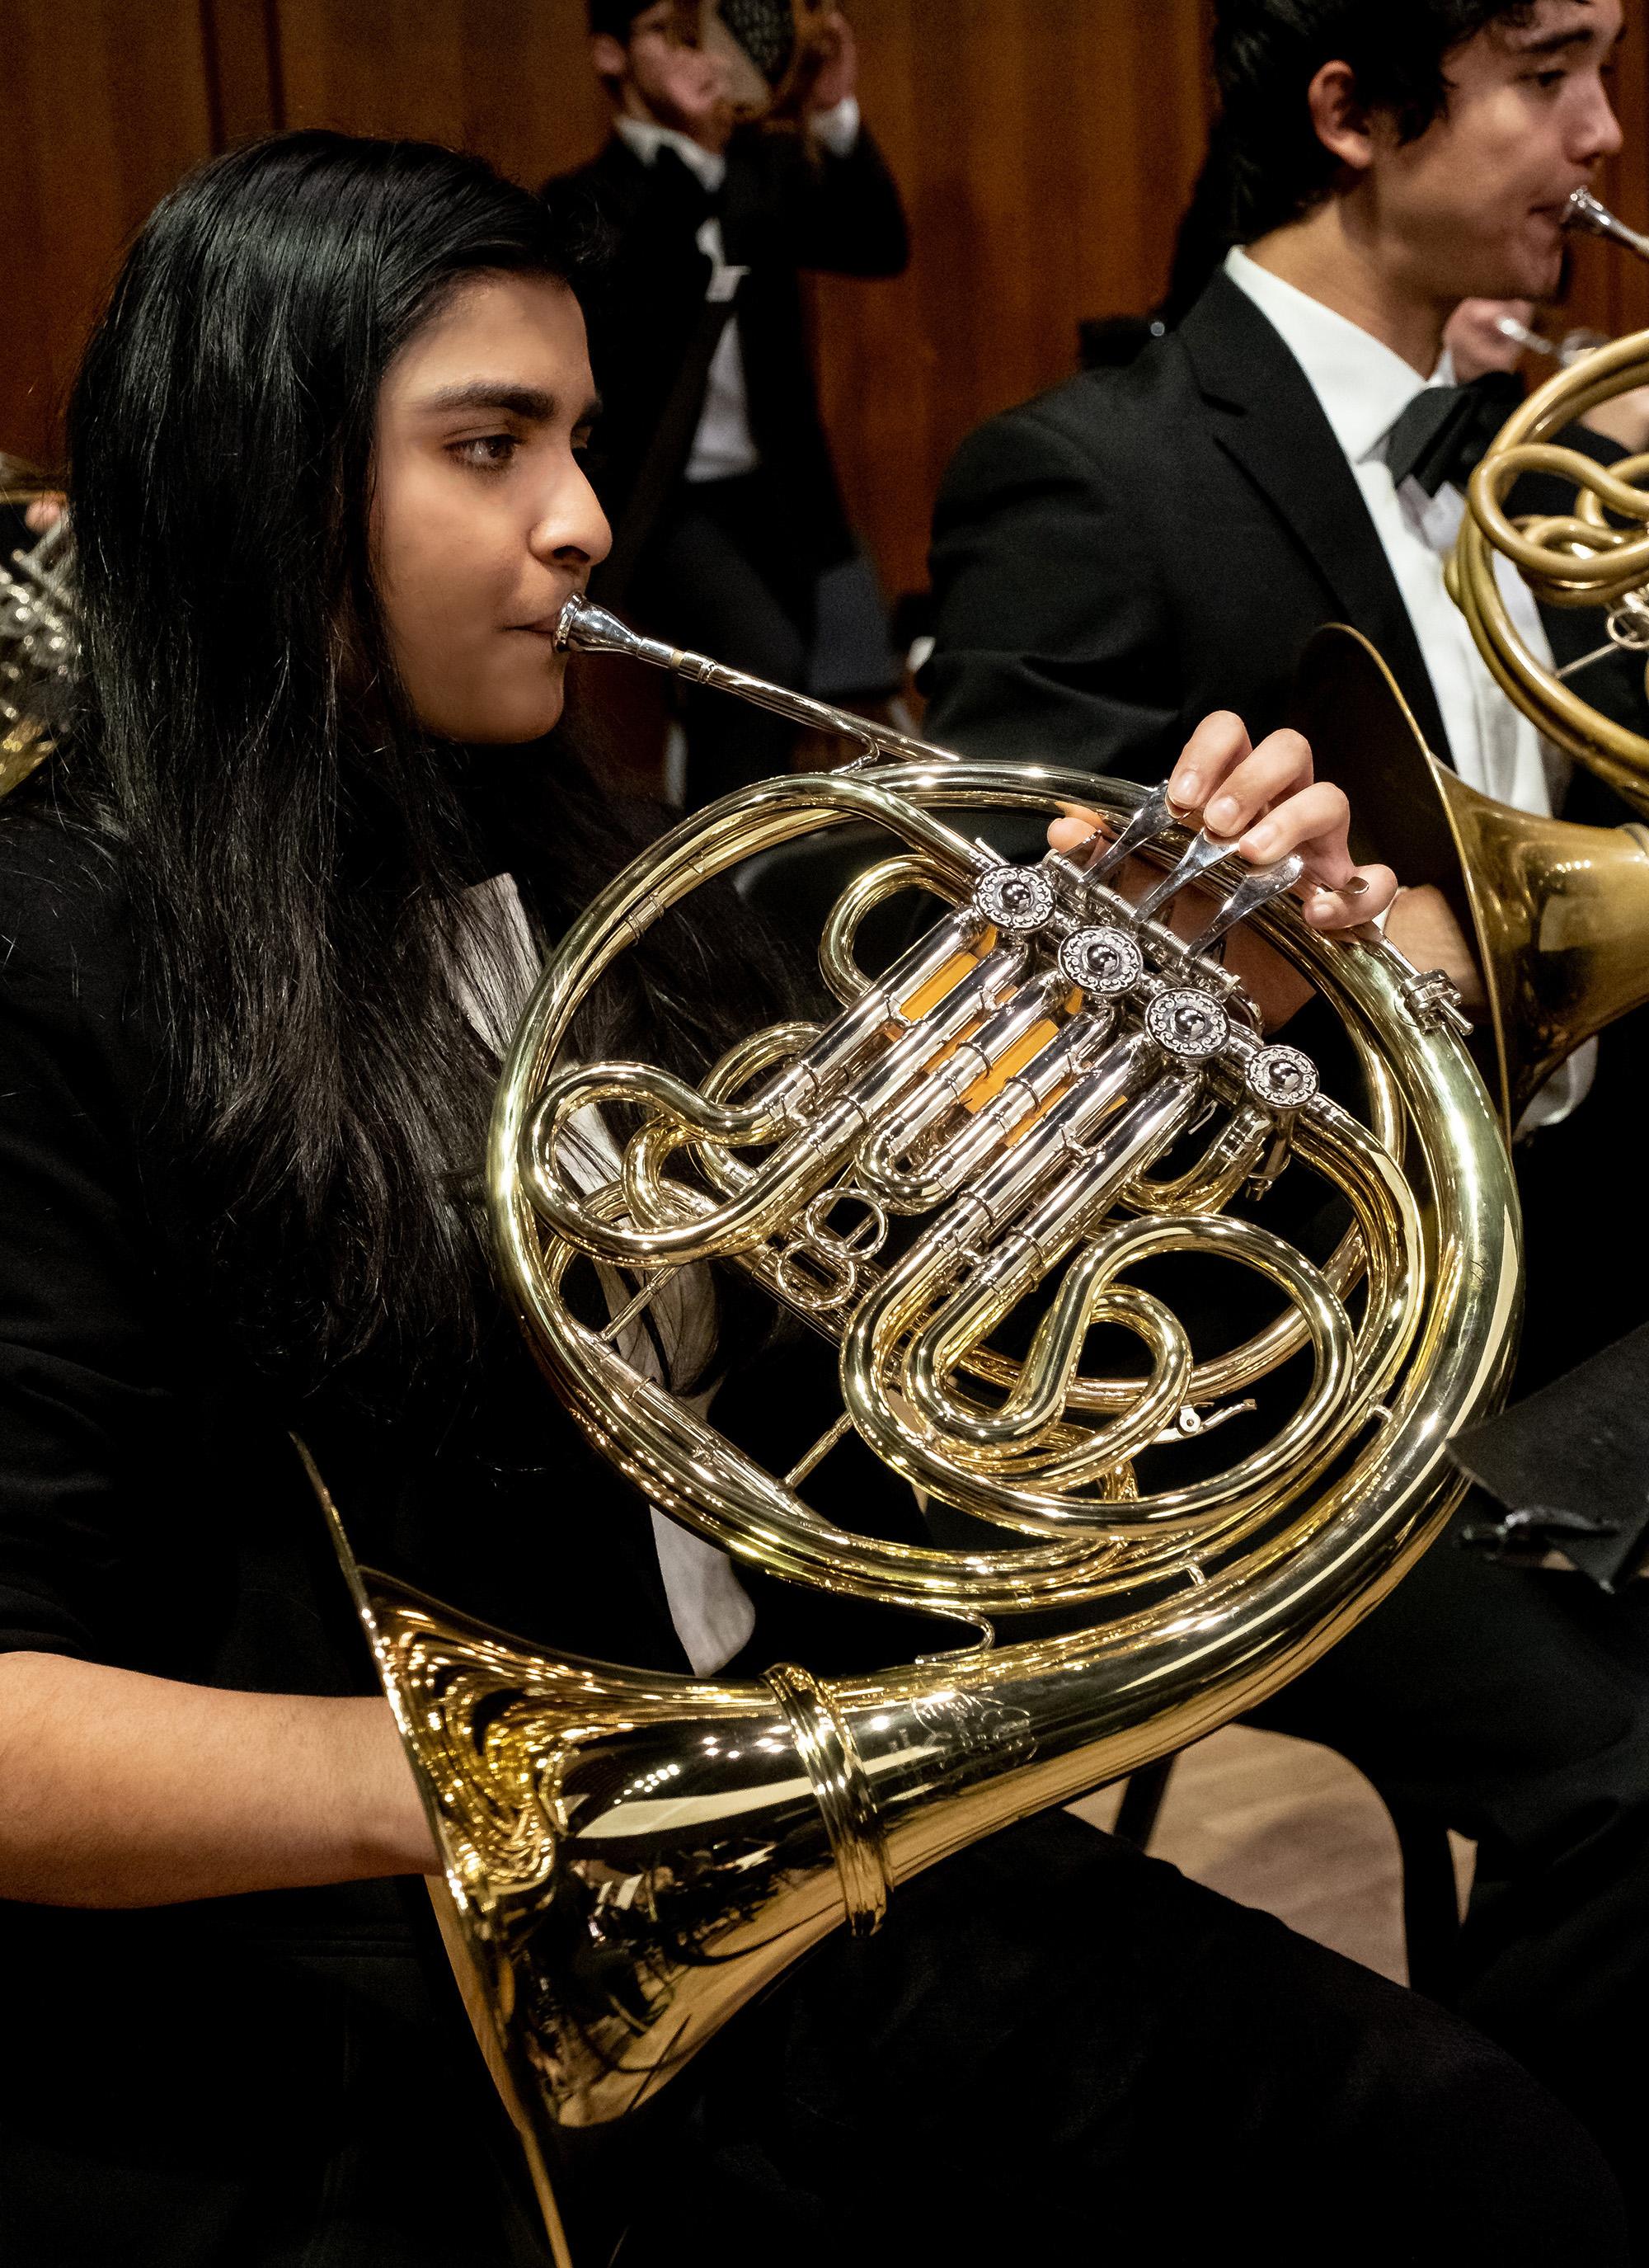 A horn player performs during an orchestra performance.